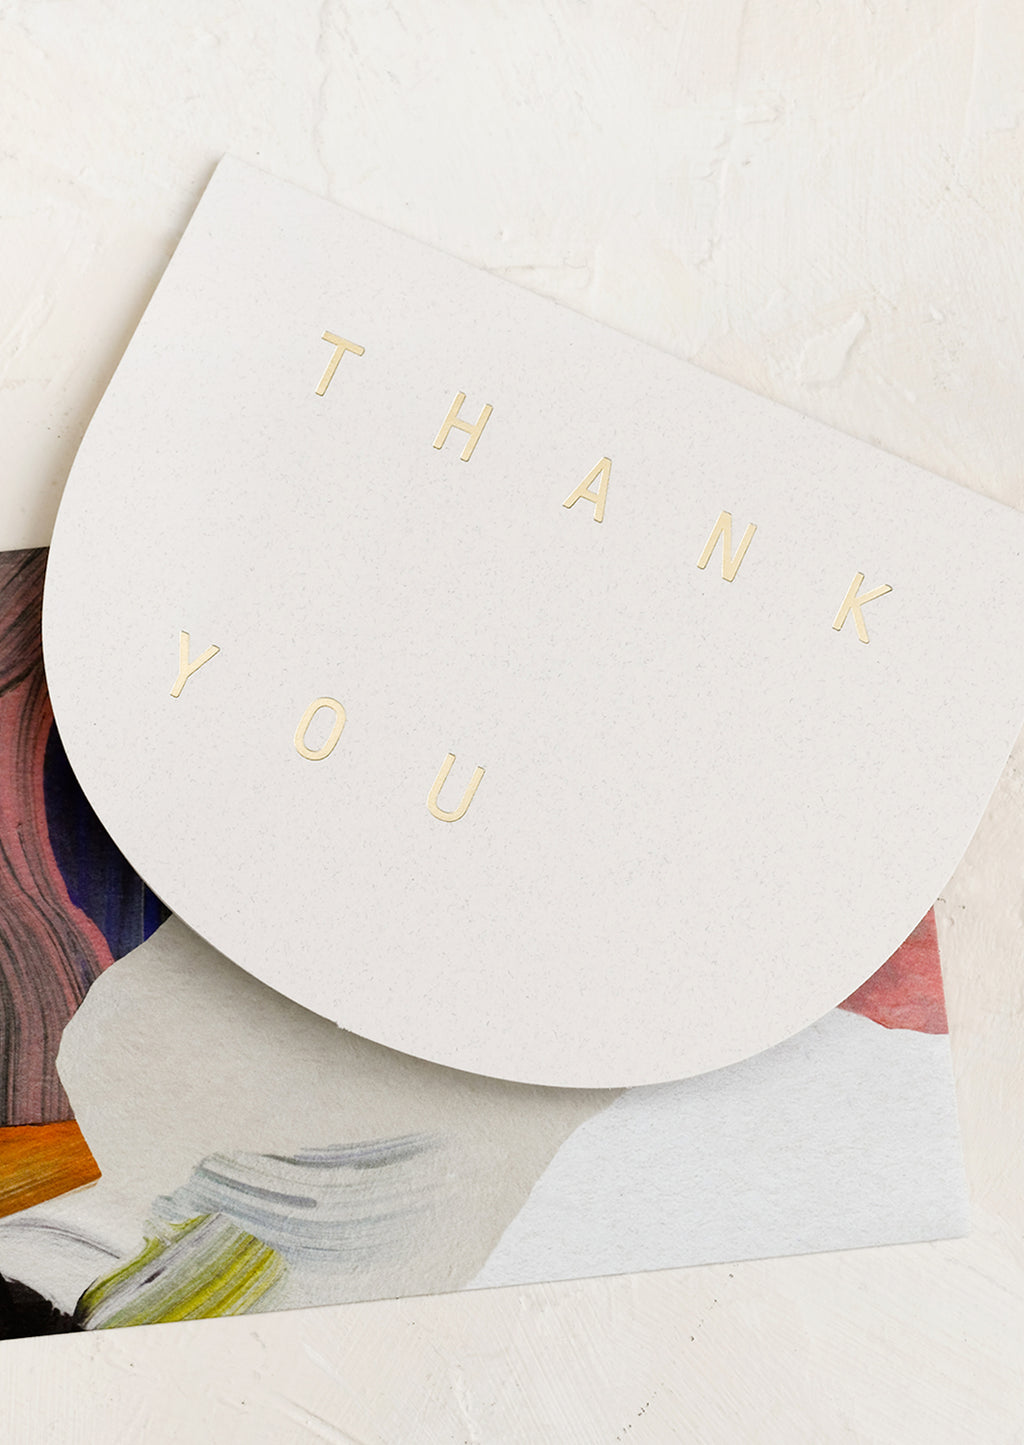 1: An arch shaped card reading "THANK YOU" in gold letters.